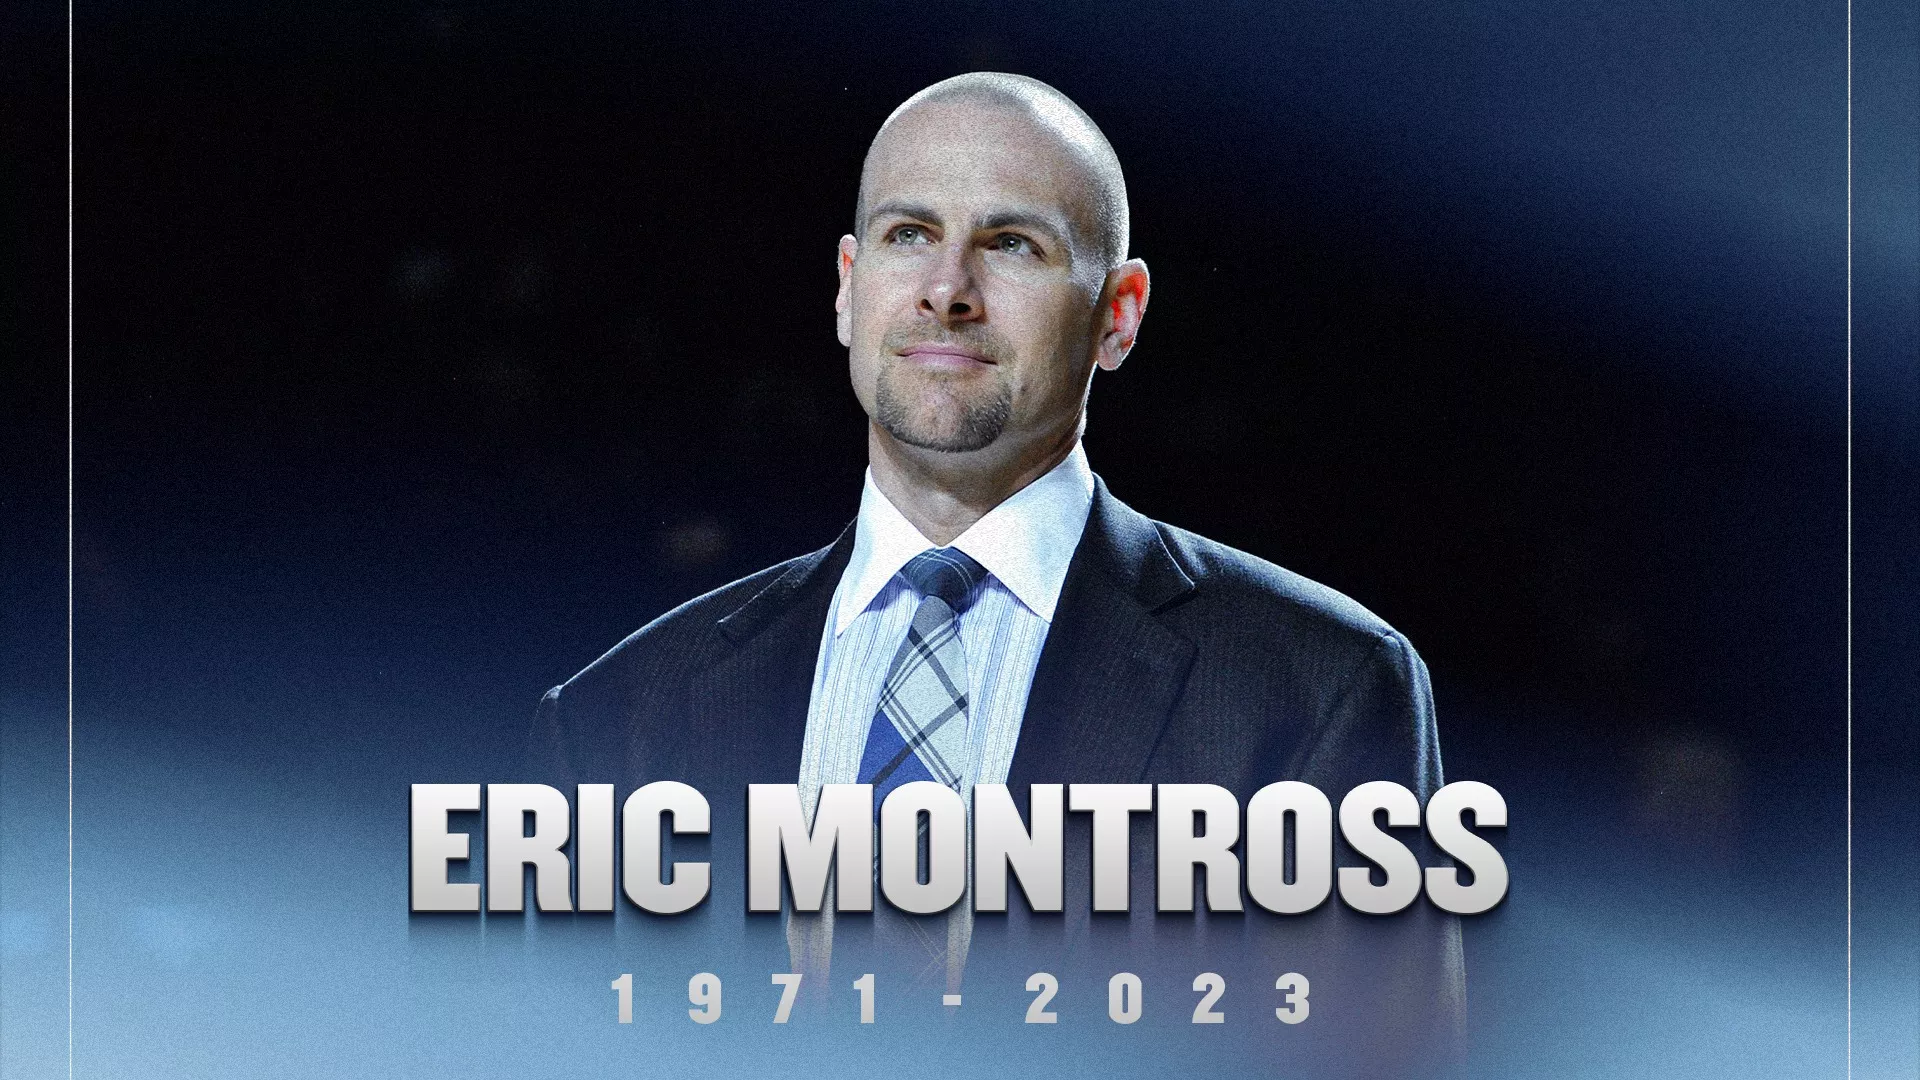 Eric Montross Died After Battle with Cancer